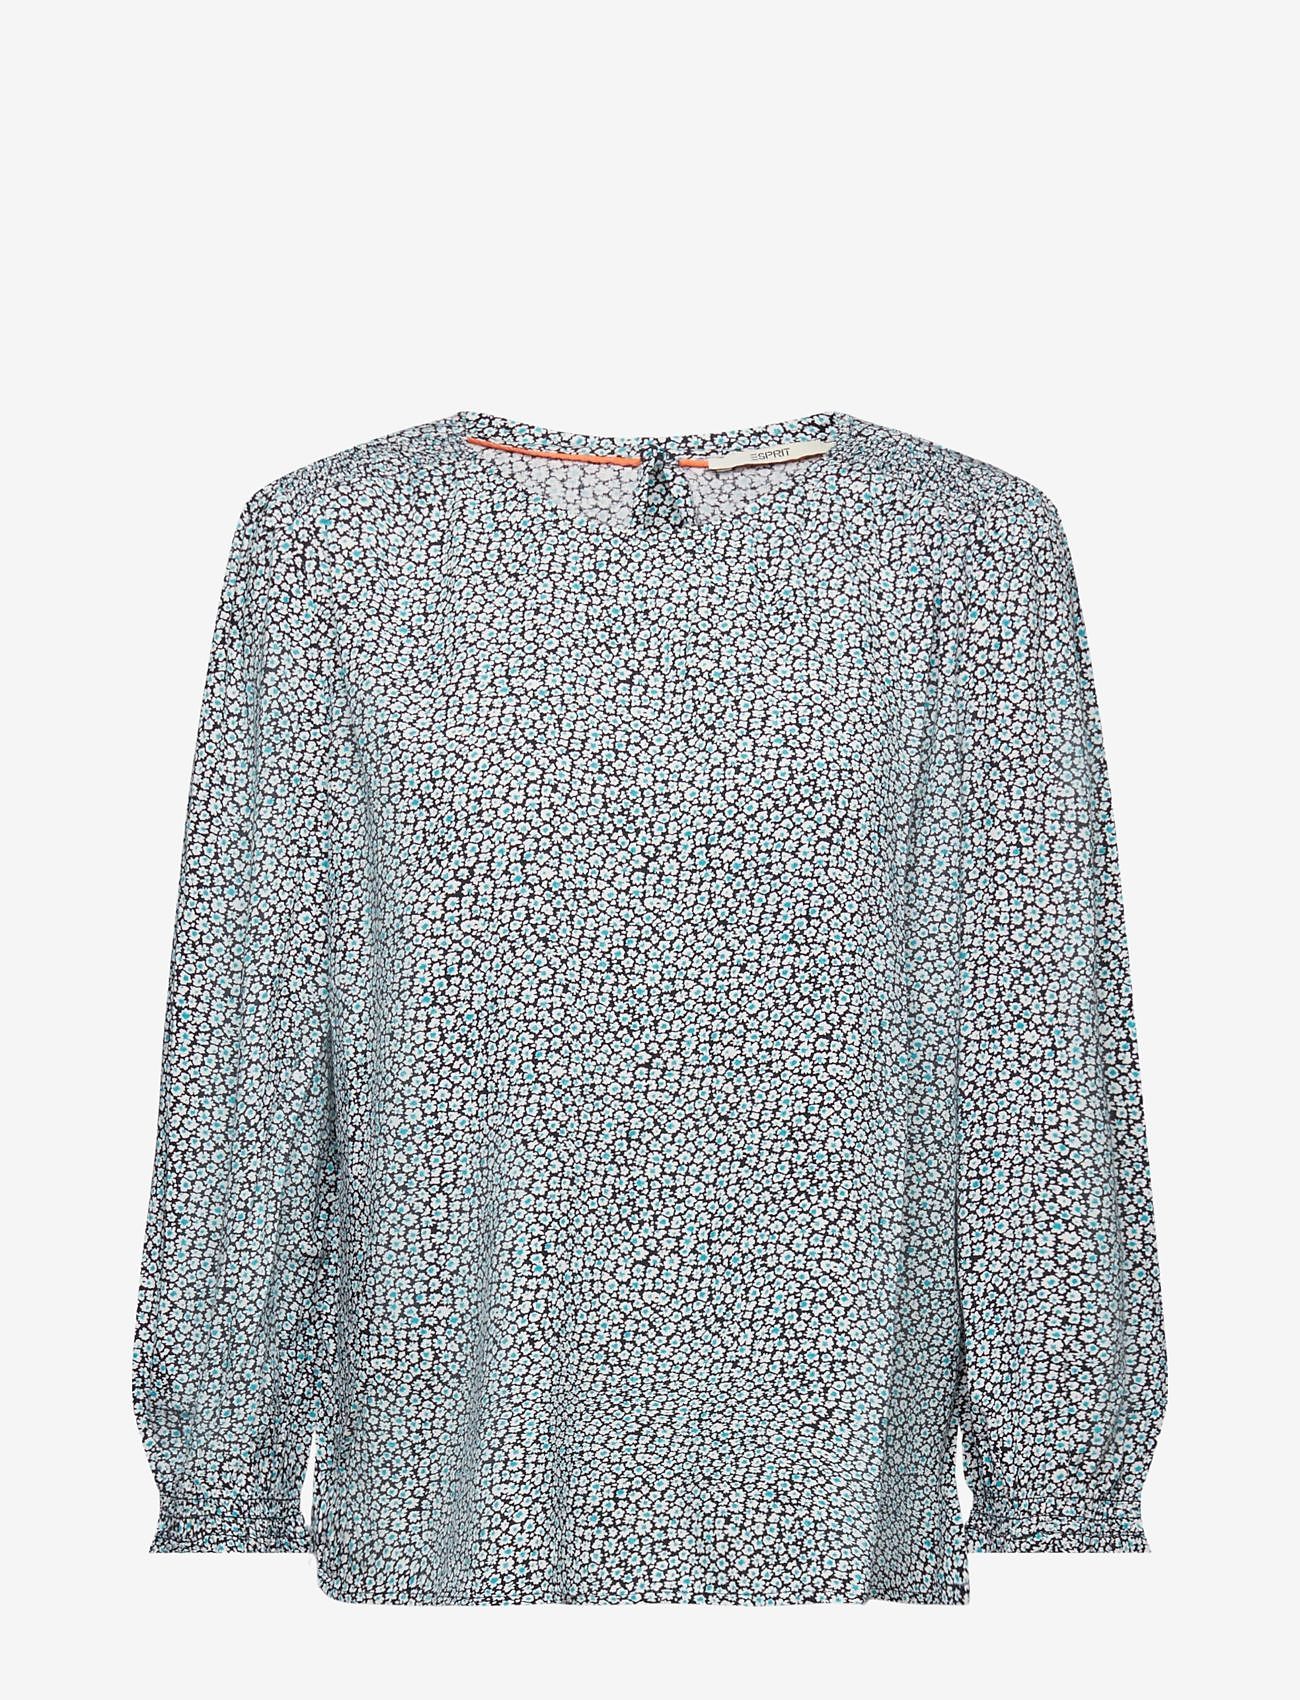 Esprit Casual - Floral blouse with 3/4 sleeves - långärmade blusar - navy - 0